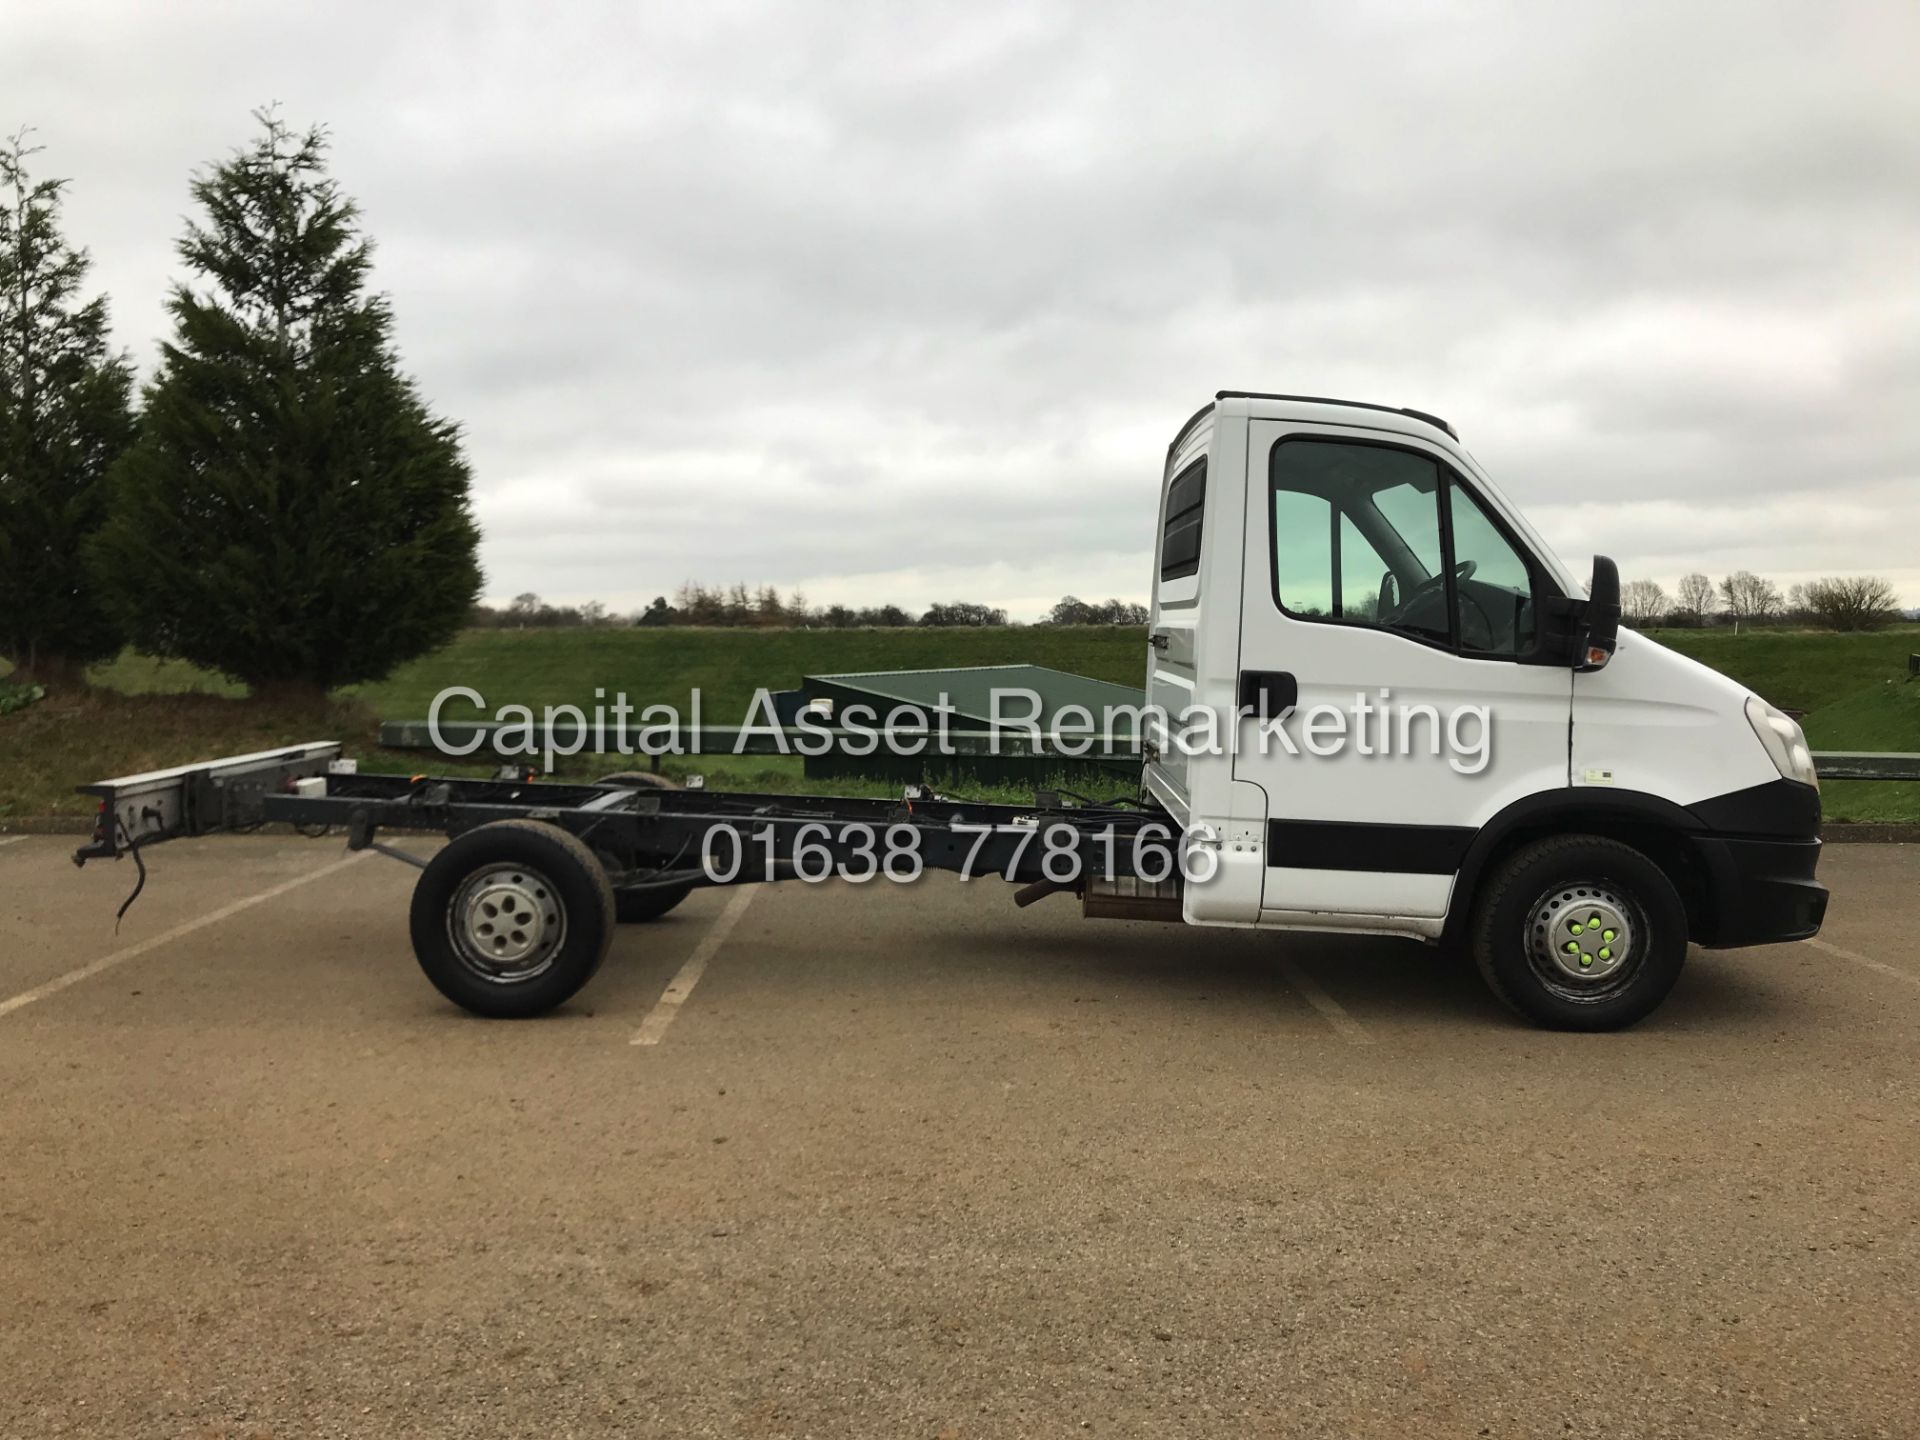 On Sale IVECO DAILY 35S11 LWB CHASSIS CAB (14 REG) 1 OWNER - IDEAL RECOVERY CONVERSION !!! - Image 4 of 7